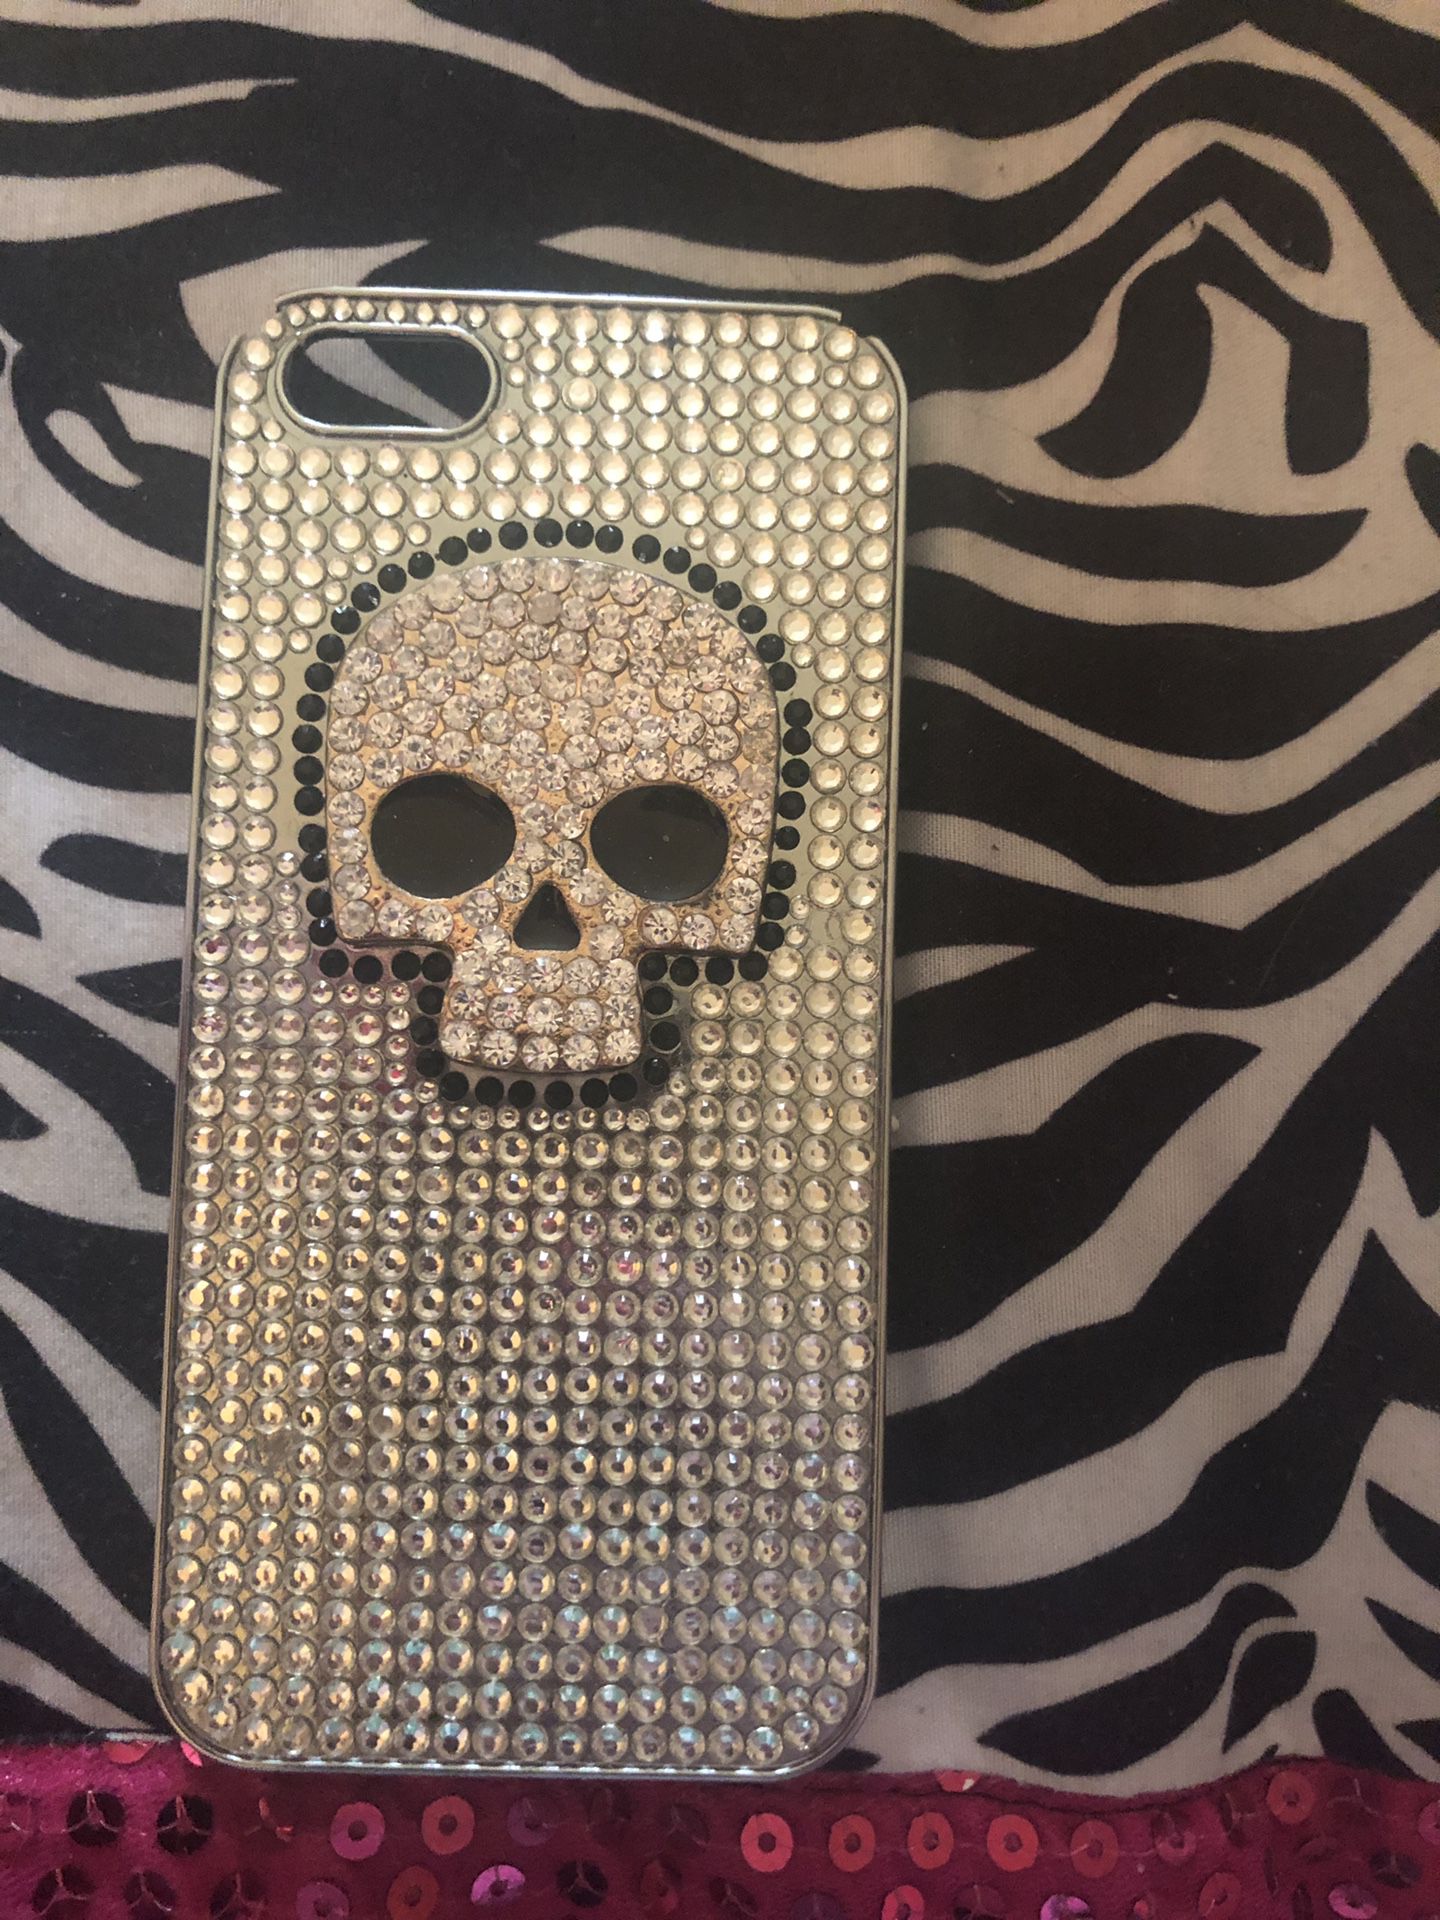 SKULL CASE for iPhone 5/5s